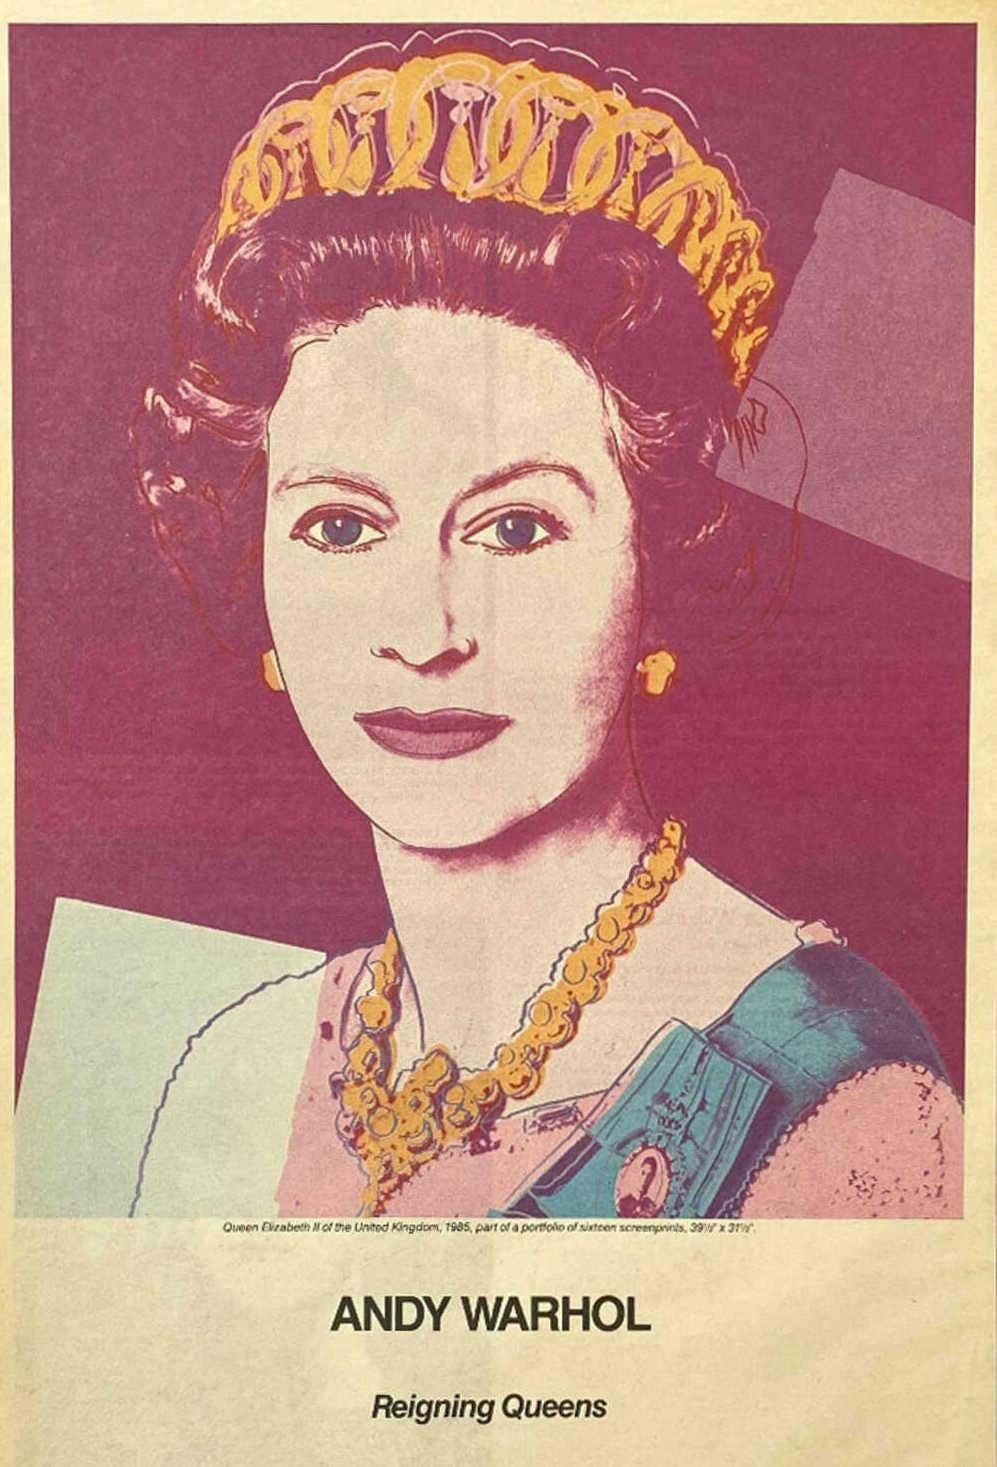 Andy Warhol Queens advertisement circa 1985 featuring Queen Elizabeth:

Vintage original 1980s poster advertisement for Andy Warhol Reigning Queens at Leo Castelli gallery, New York.

Offset printed on newspaper stock. Measures: 11 x 17 inches.